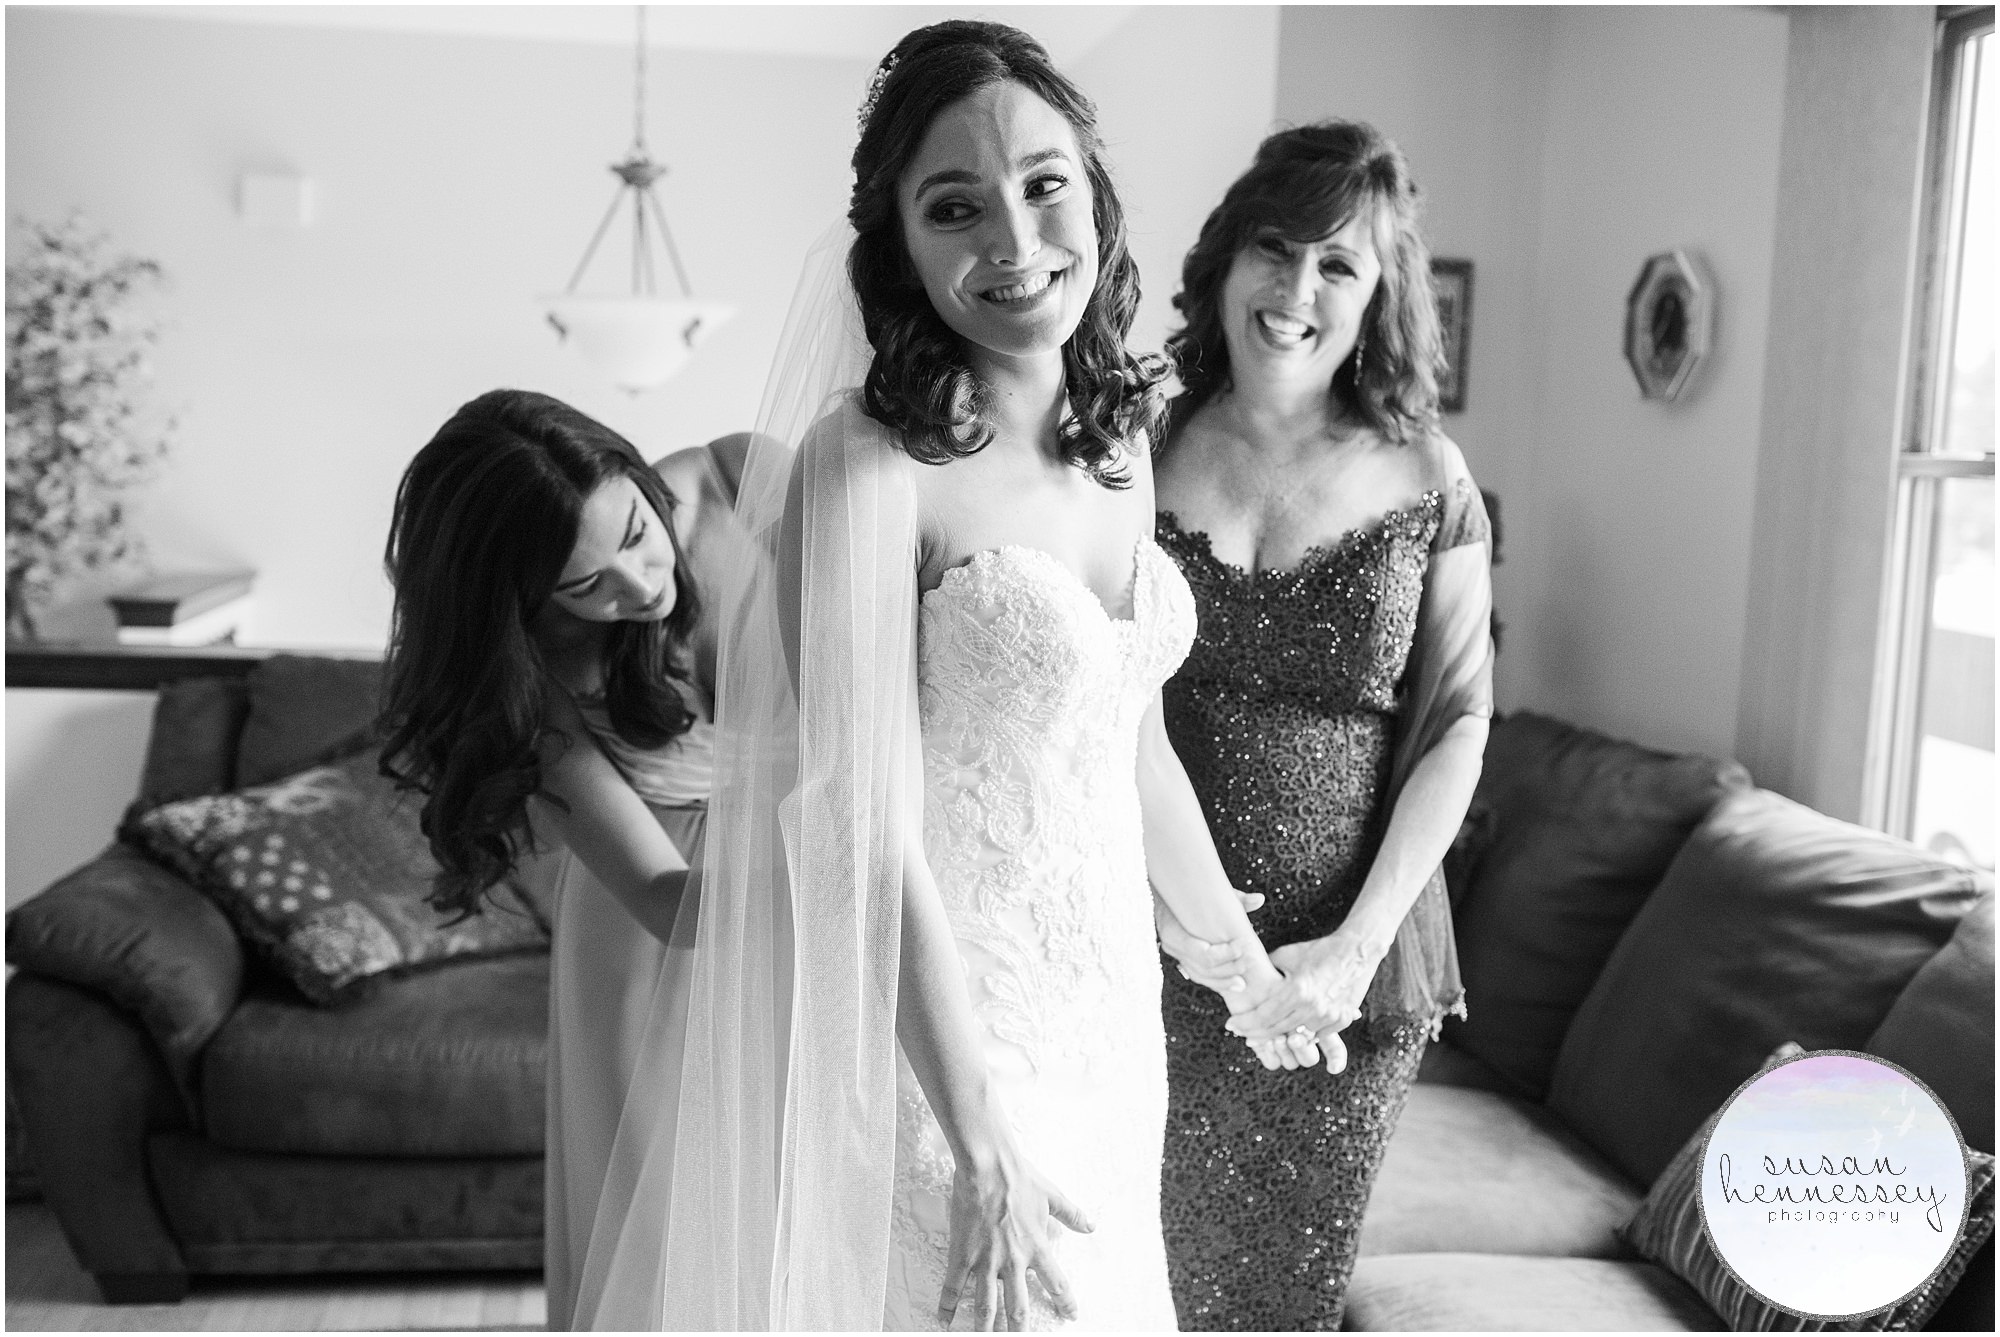 Bride dresses into wedding gown with the help of her maid of honor and mother